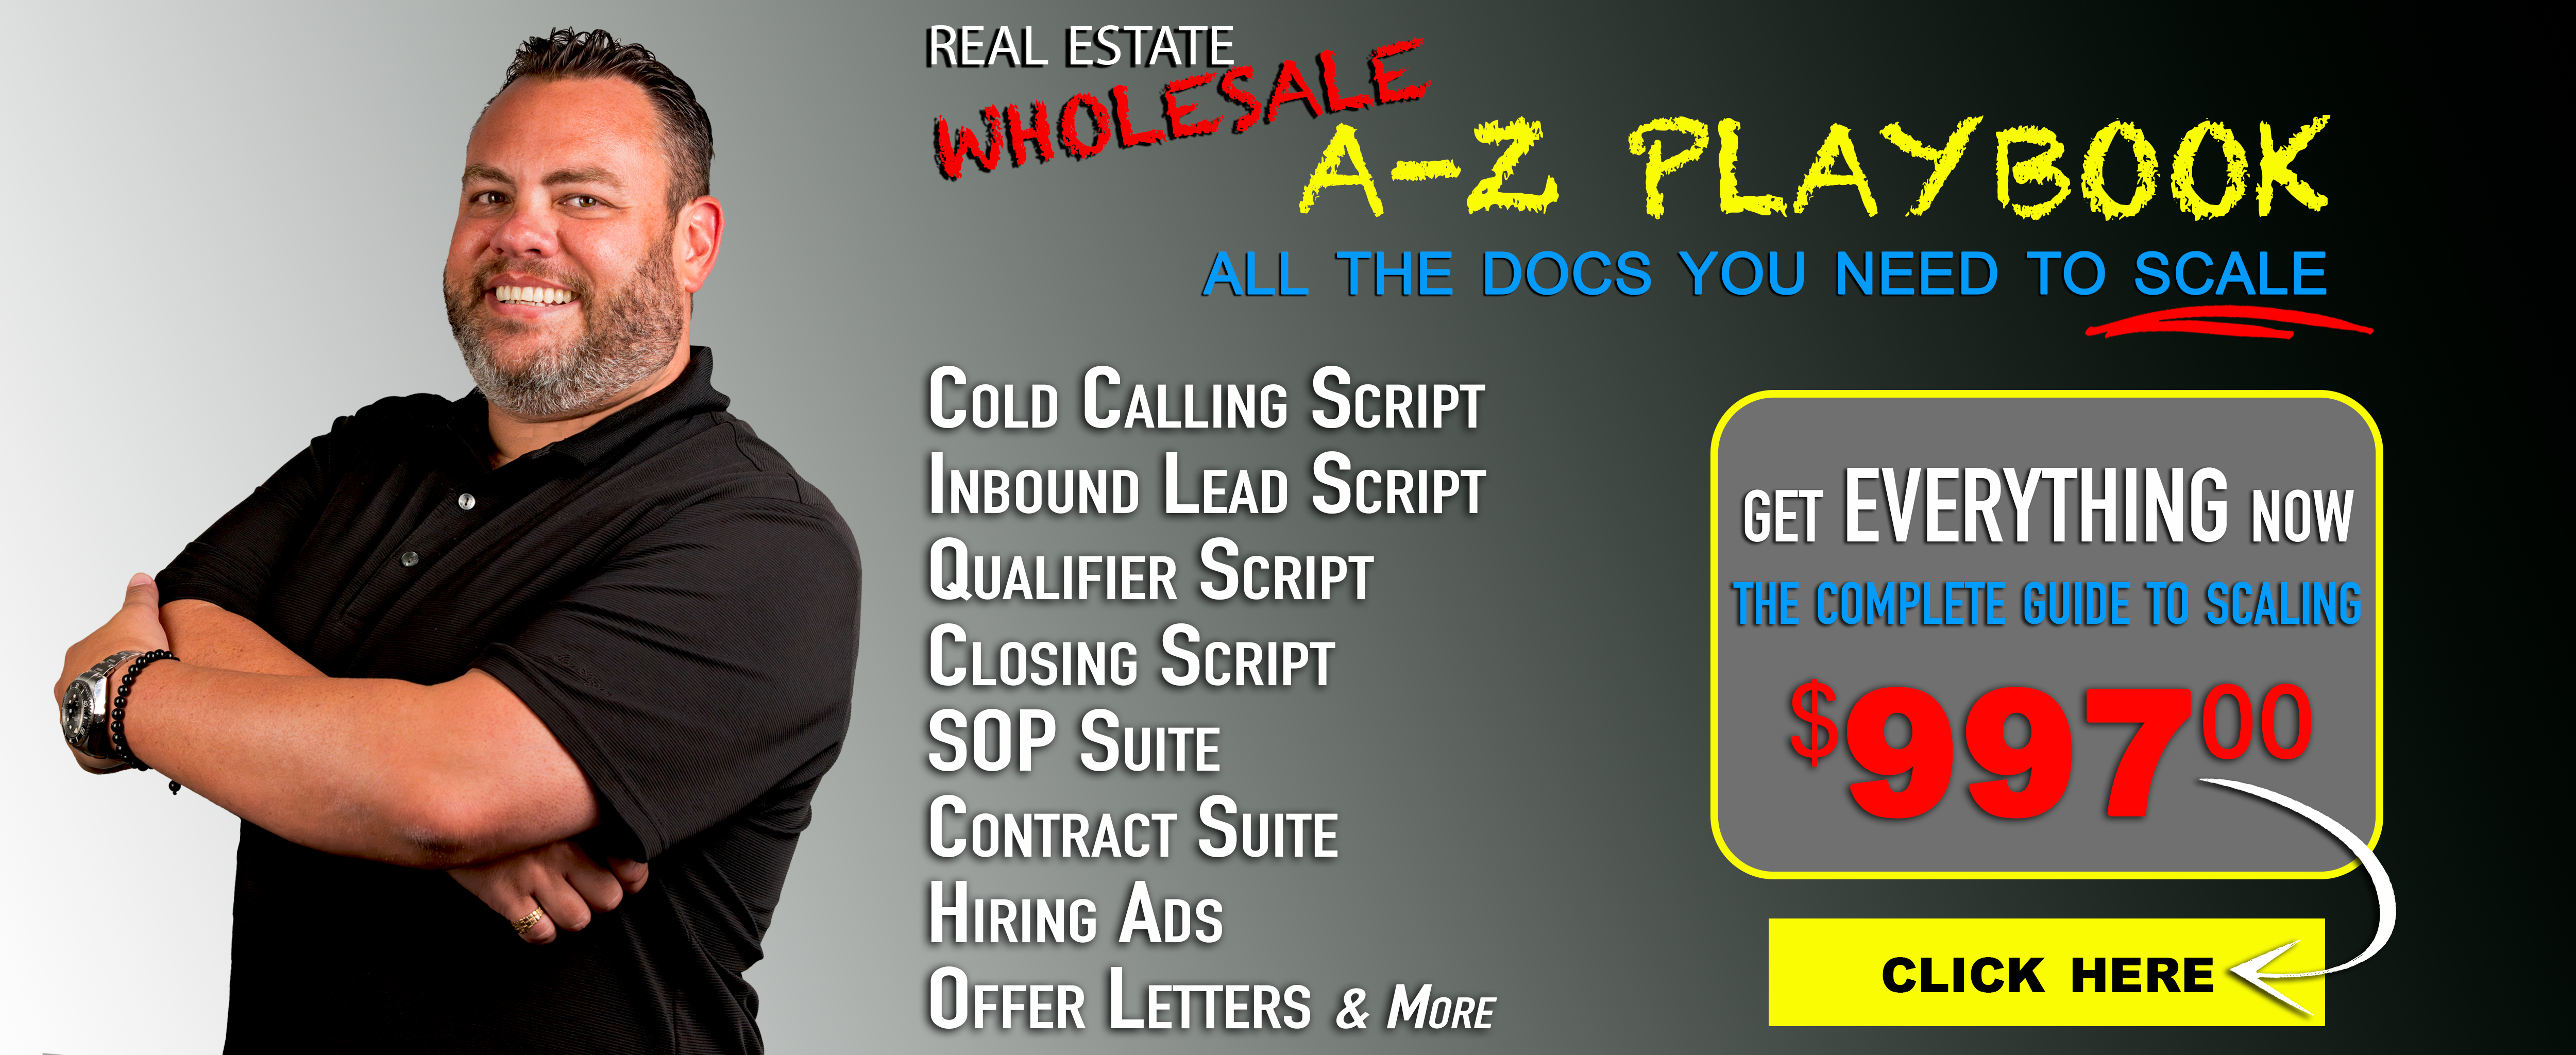 Guide to Real Estate Wholesale